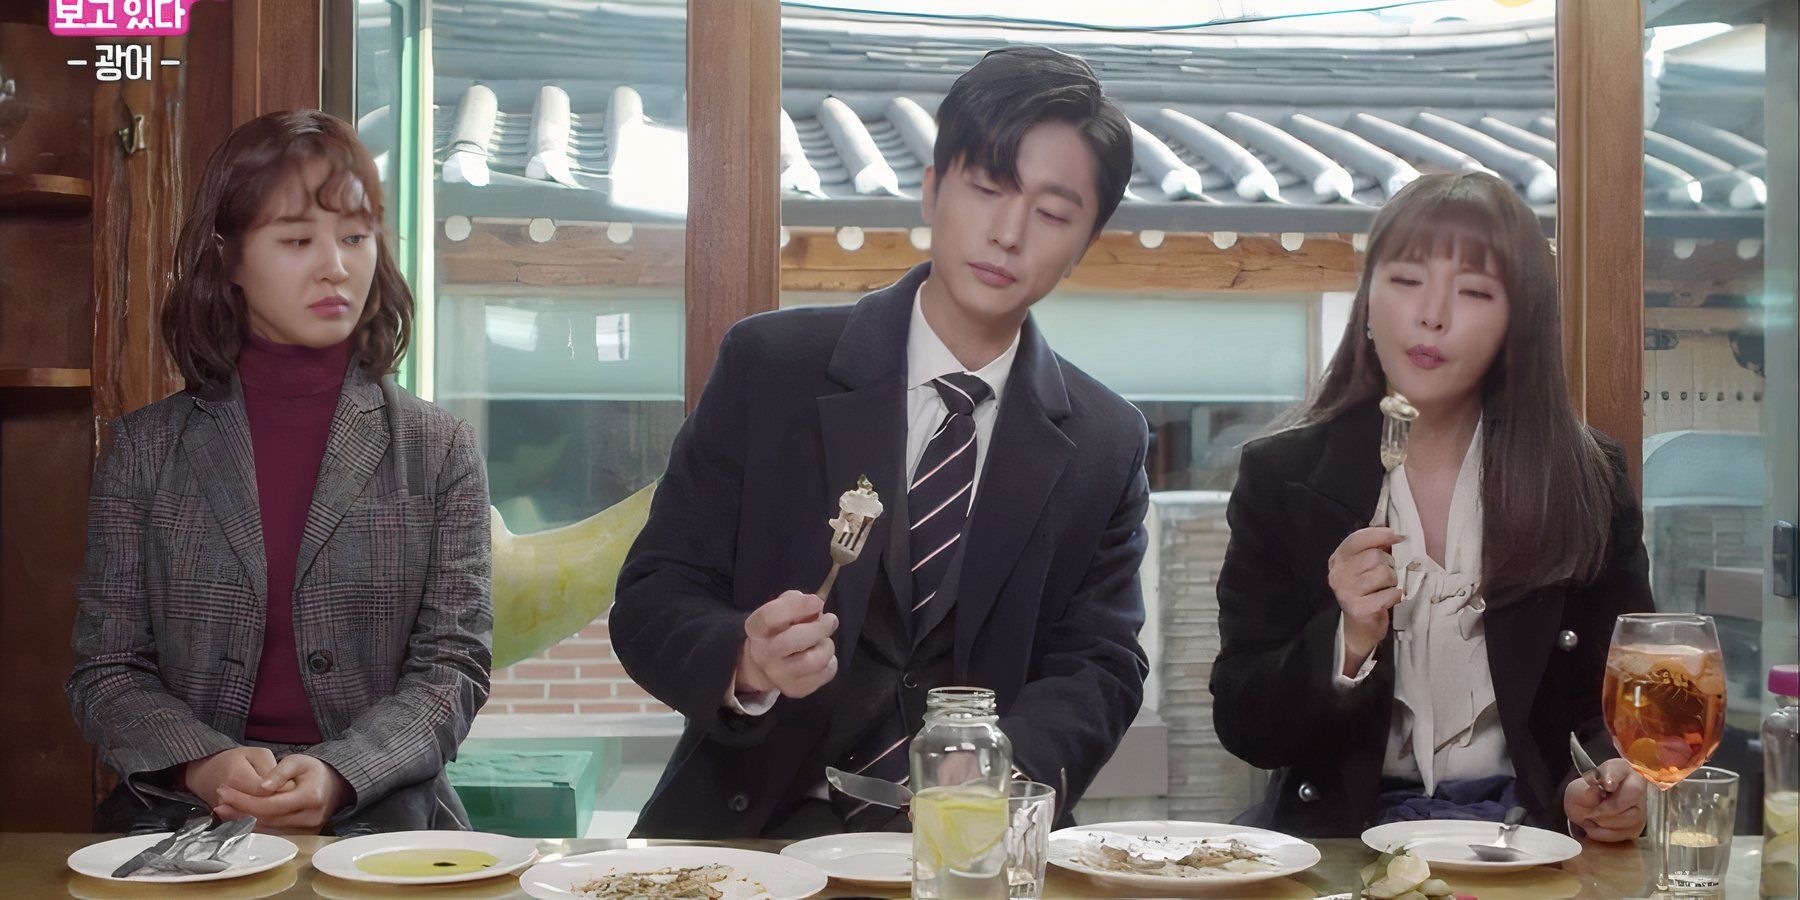 A woman watches a man and woman eat in the k-drama Dae Jang Geum Is Watching